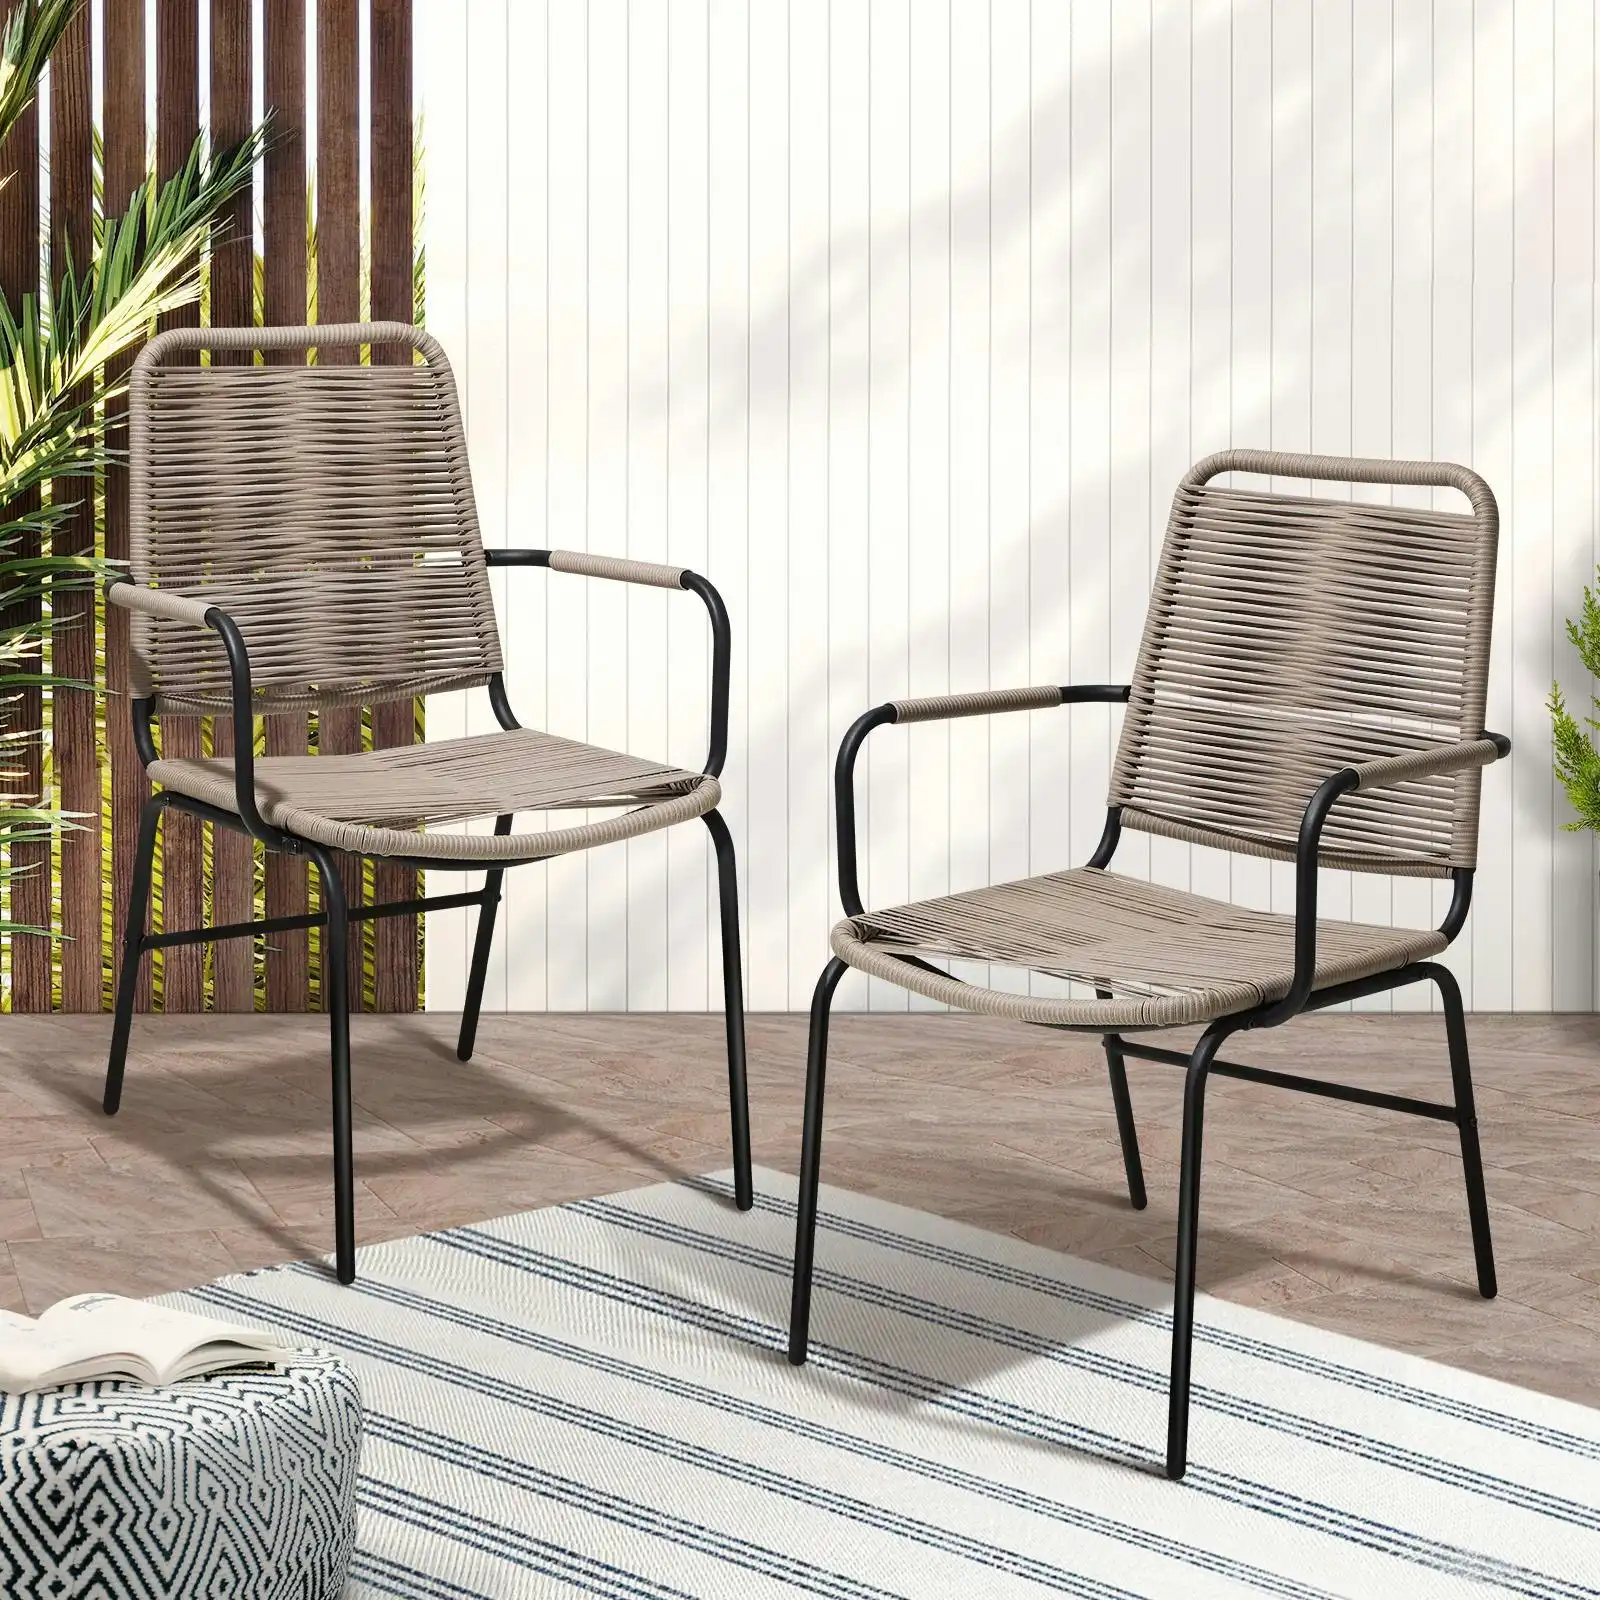 Livsip Outdoor Dining Chairs Outdoor Patio Chairs Set of 2